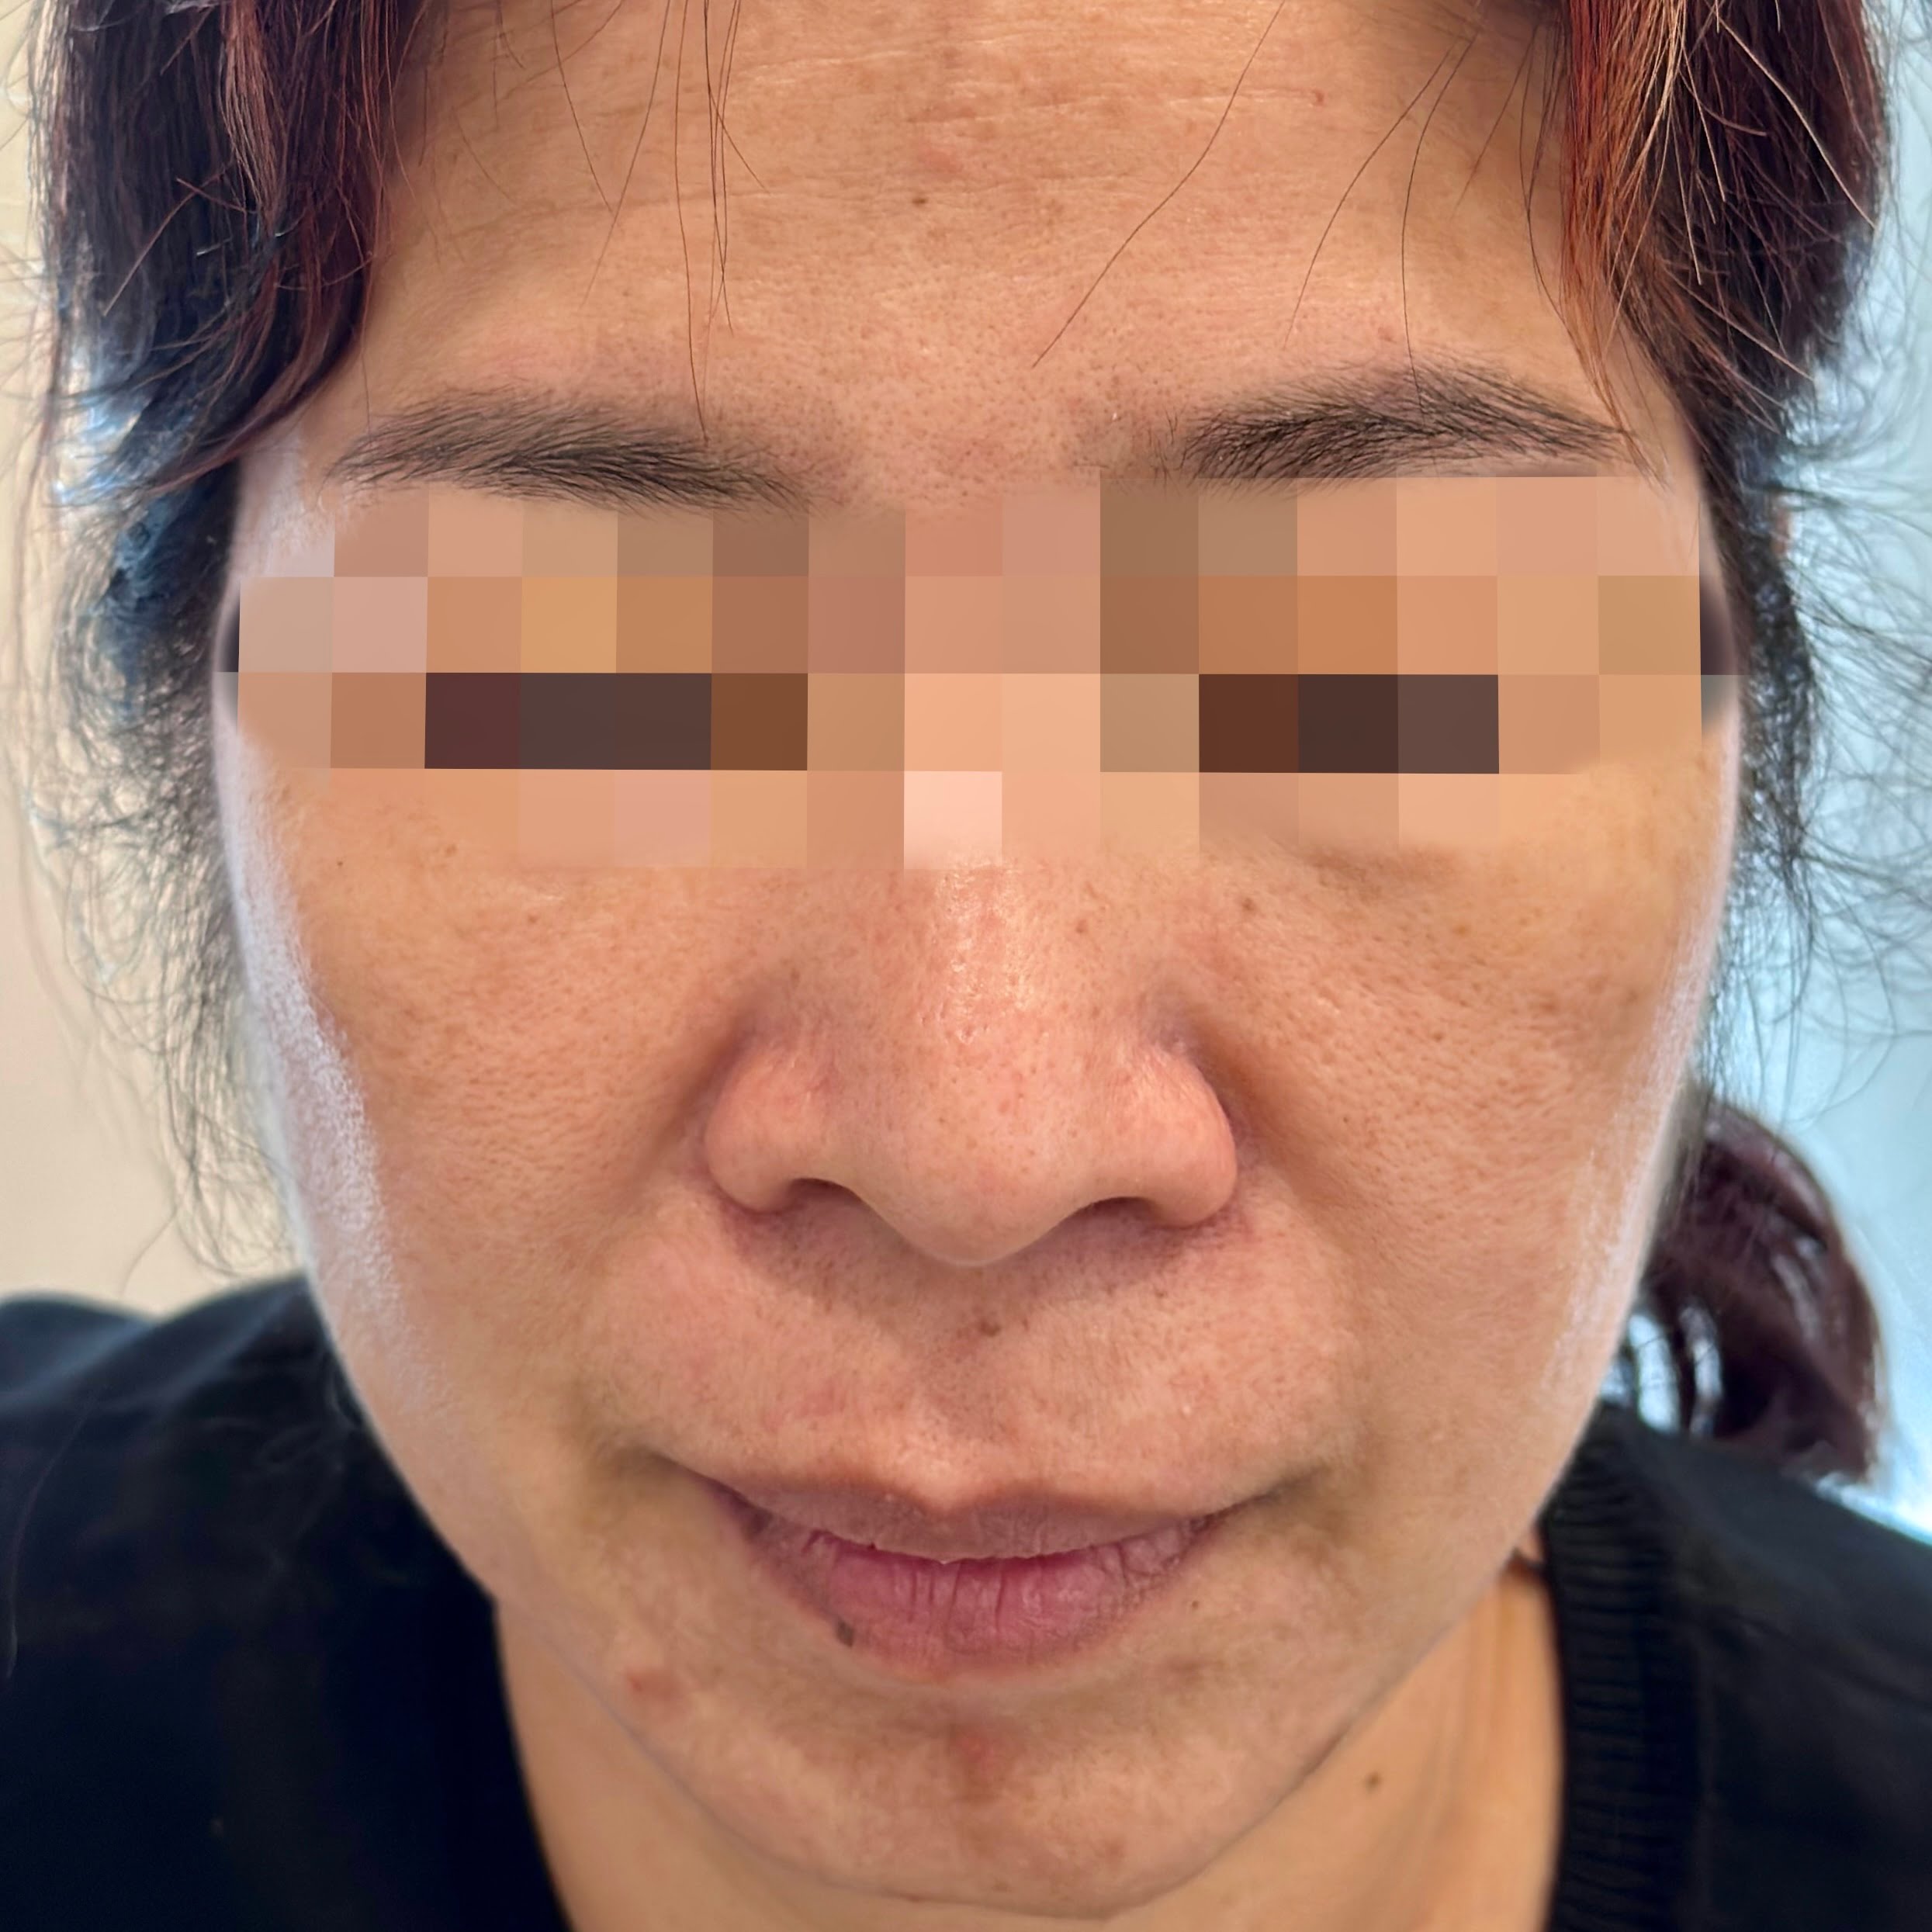 Client before Ultraformer III face lifting and tightening.